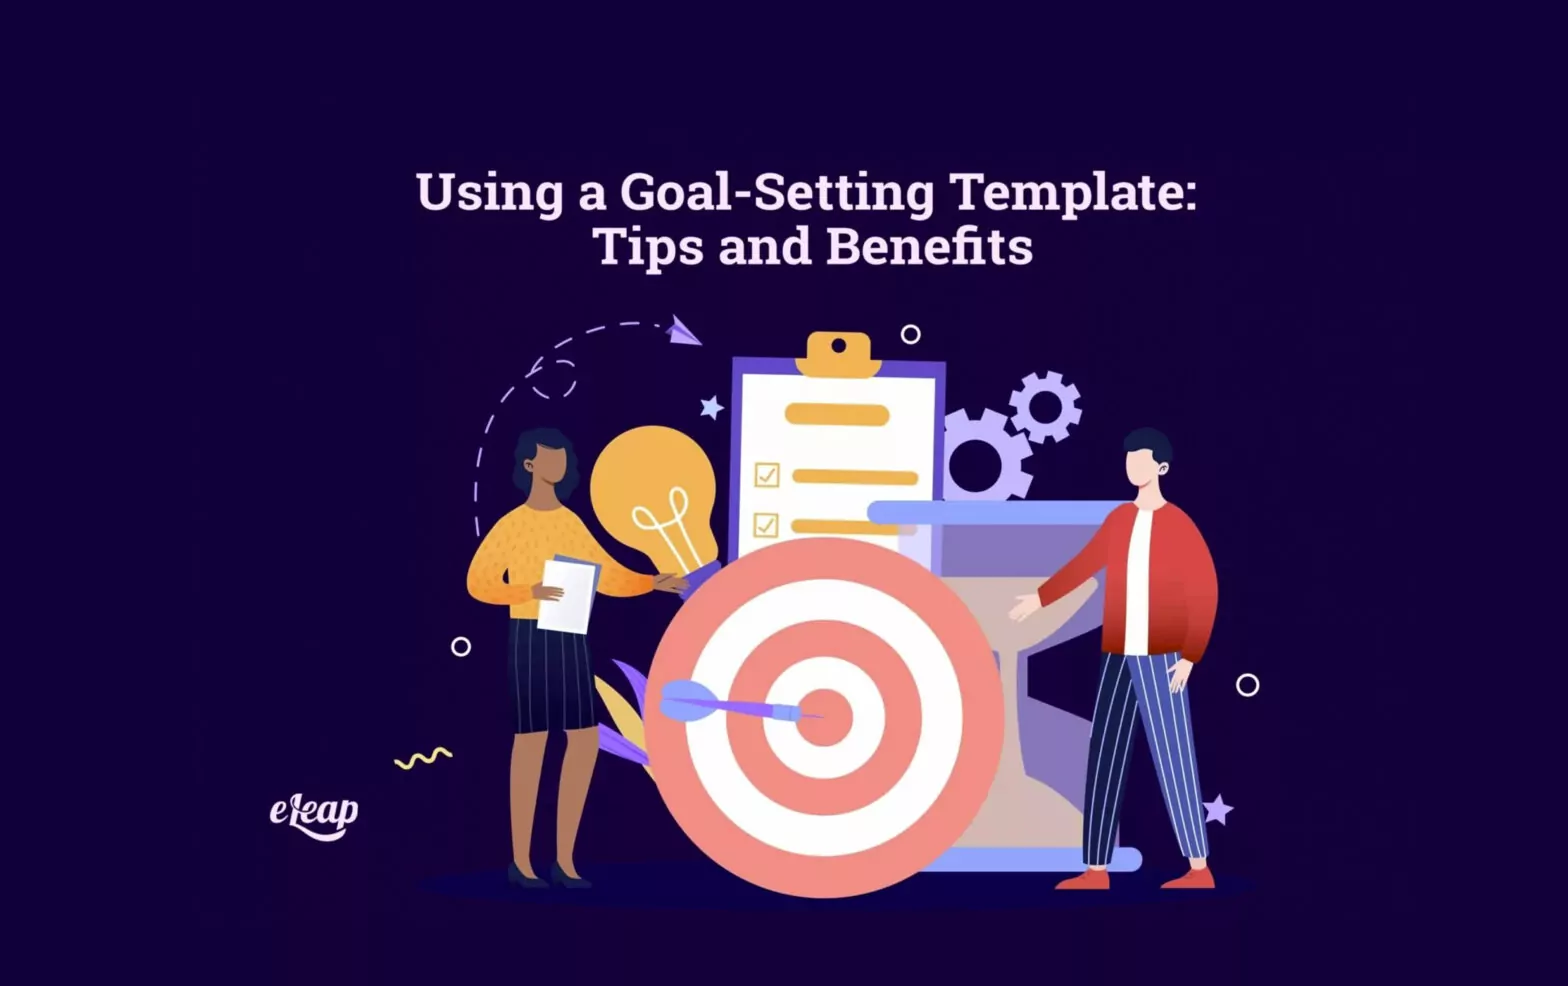 Using a Goal-Setting Template: Tips and Benefits